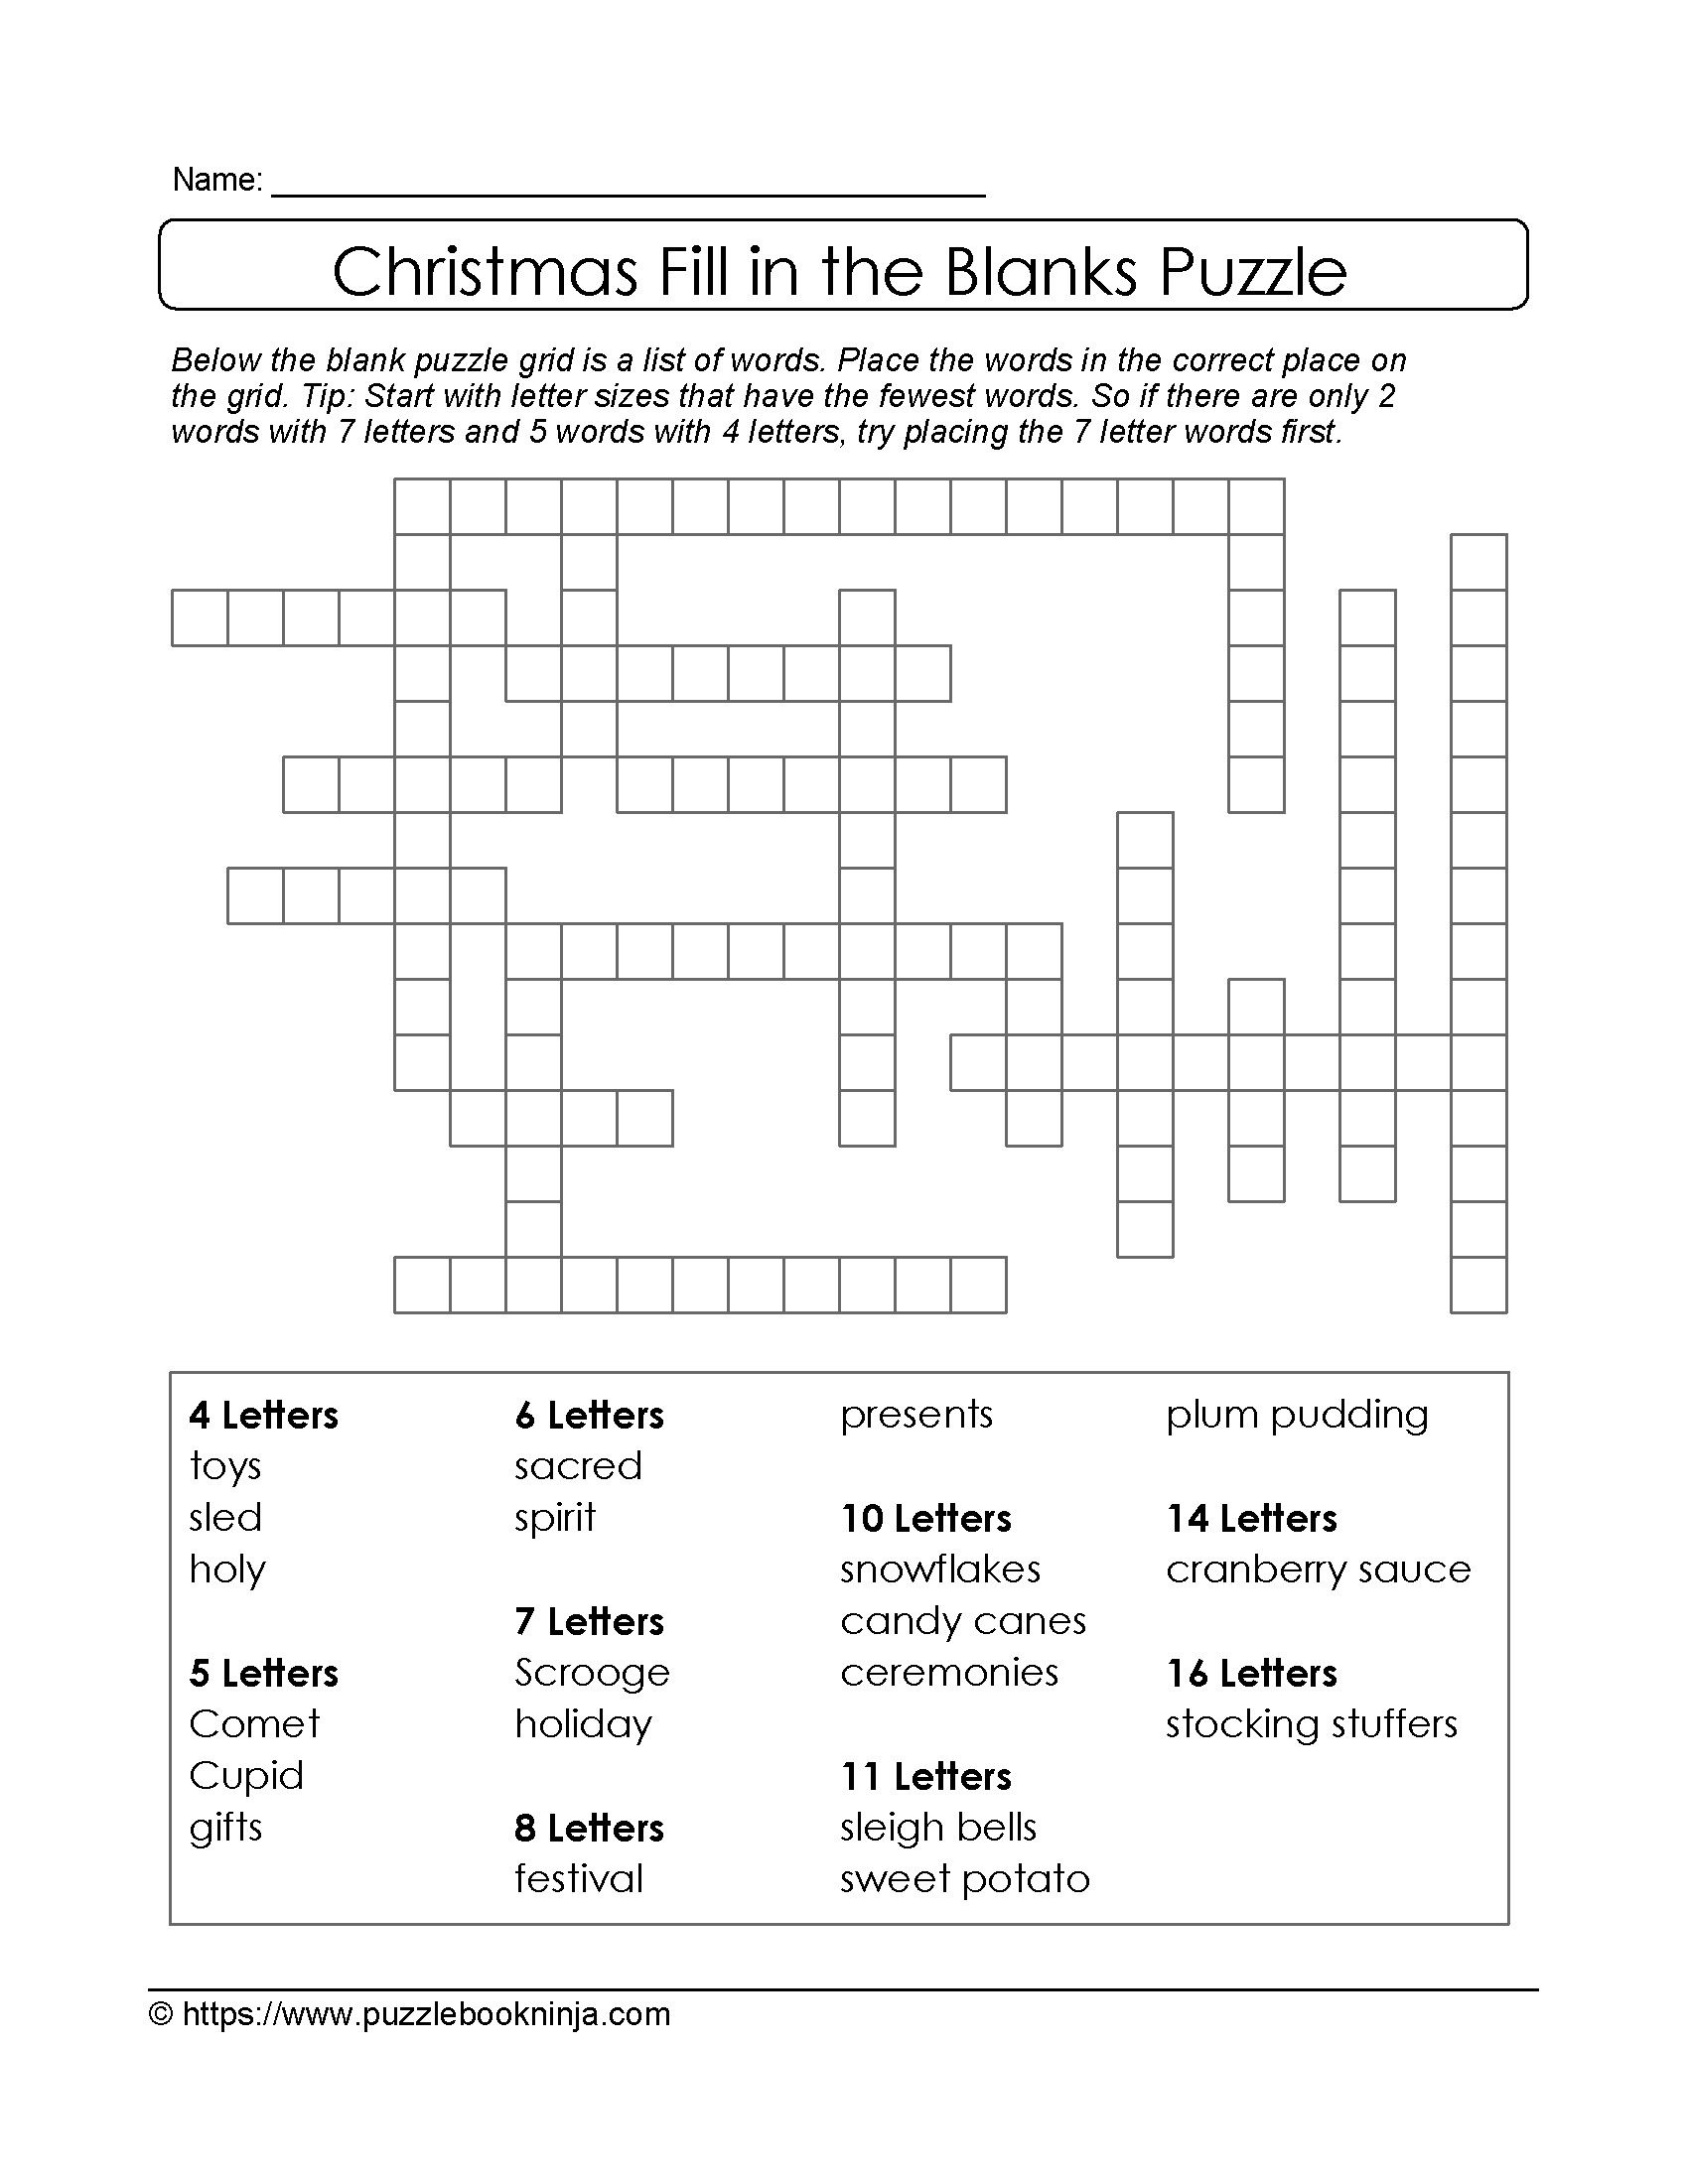 Puzzles To Print. Free Xmas Theme Fill In The Blanks Puzzle - Printable Holiday Puzzle